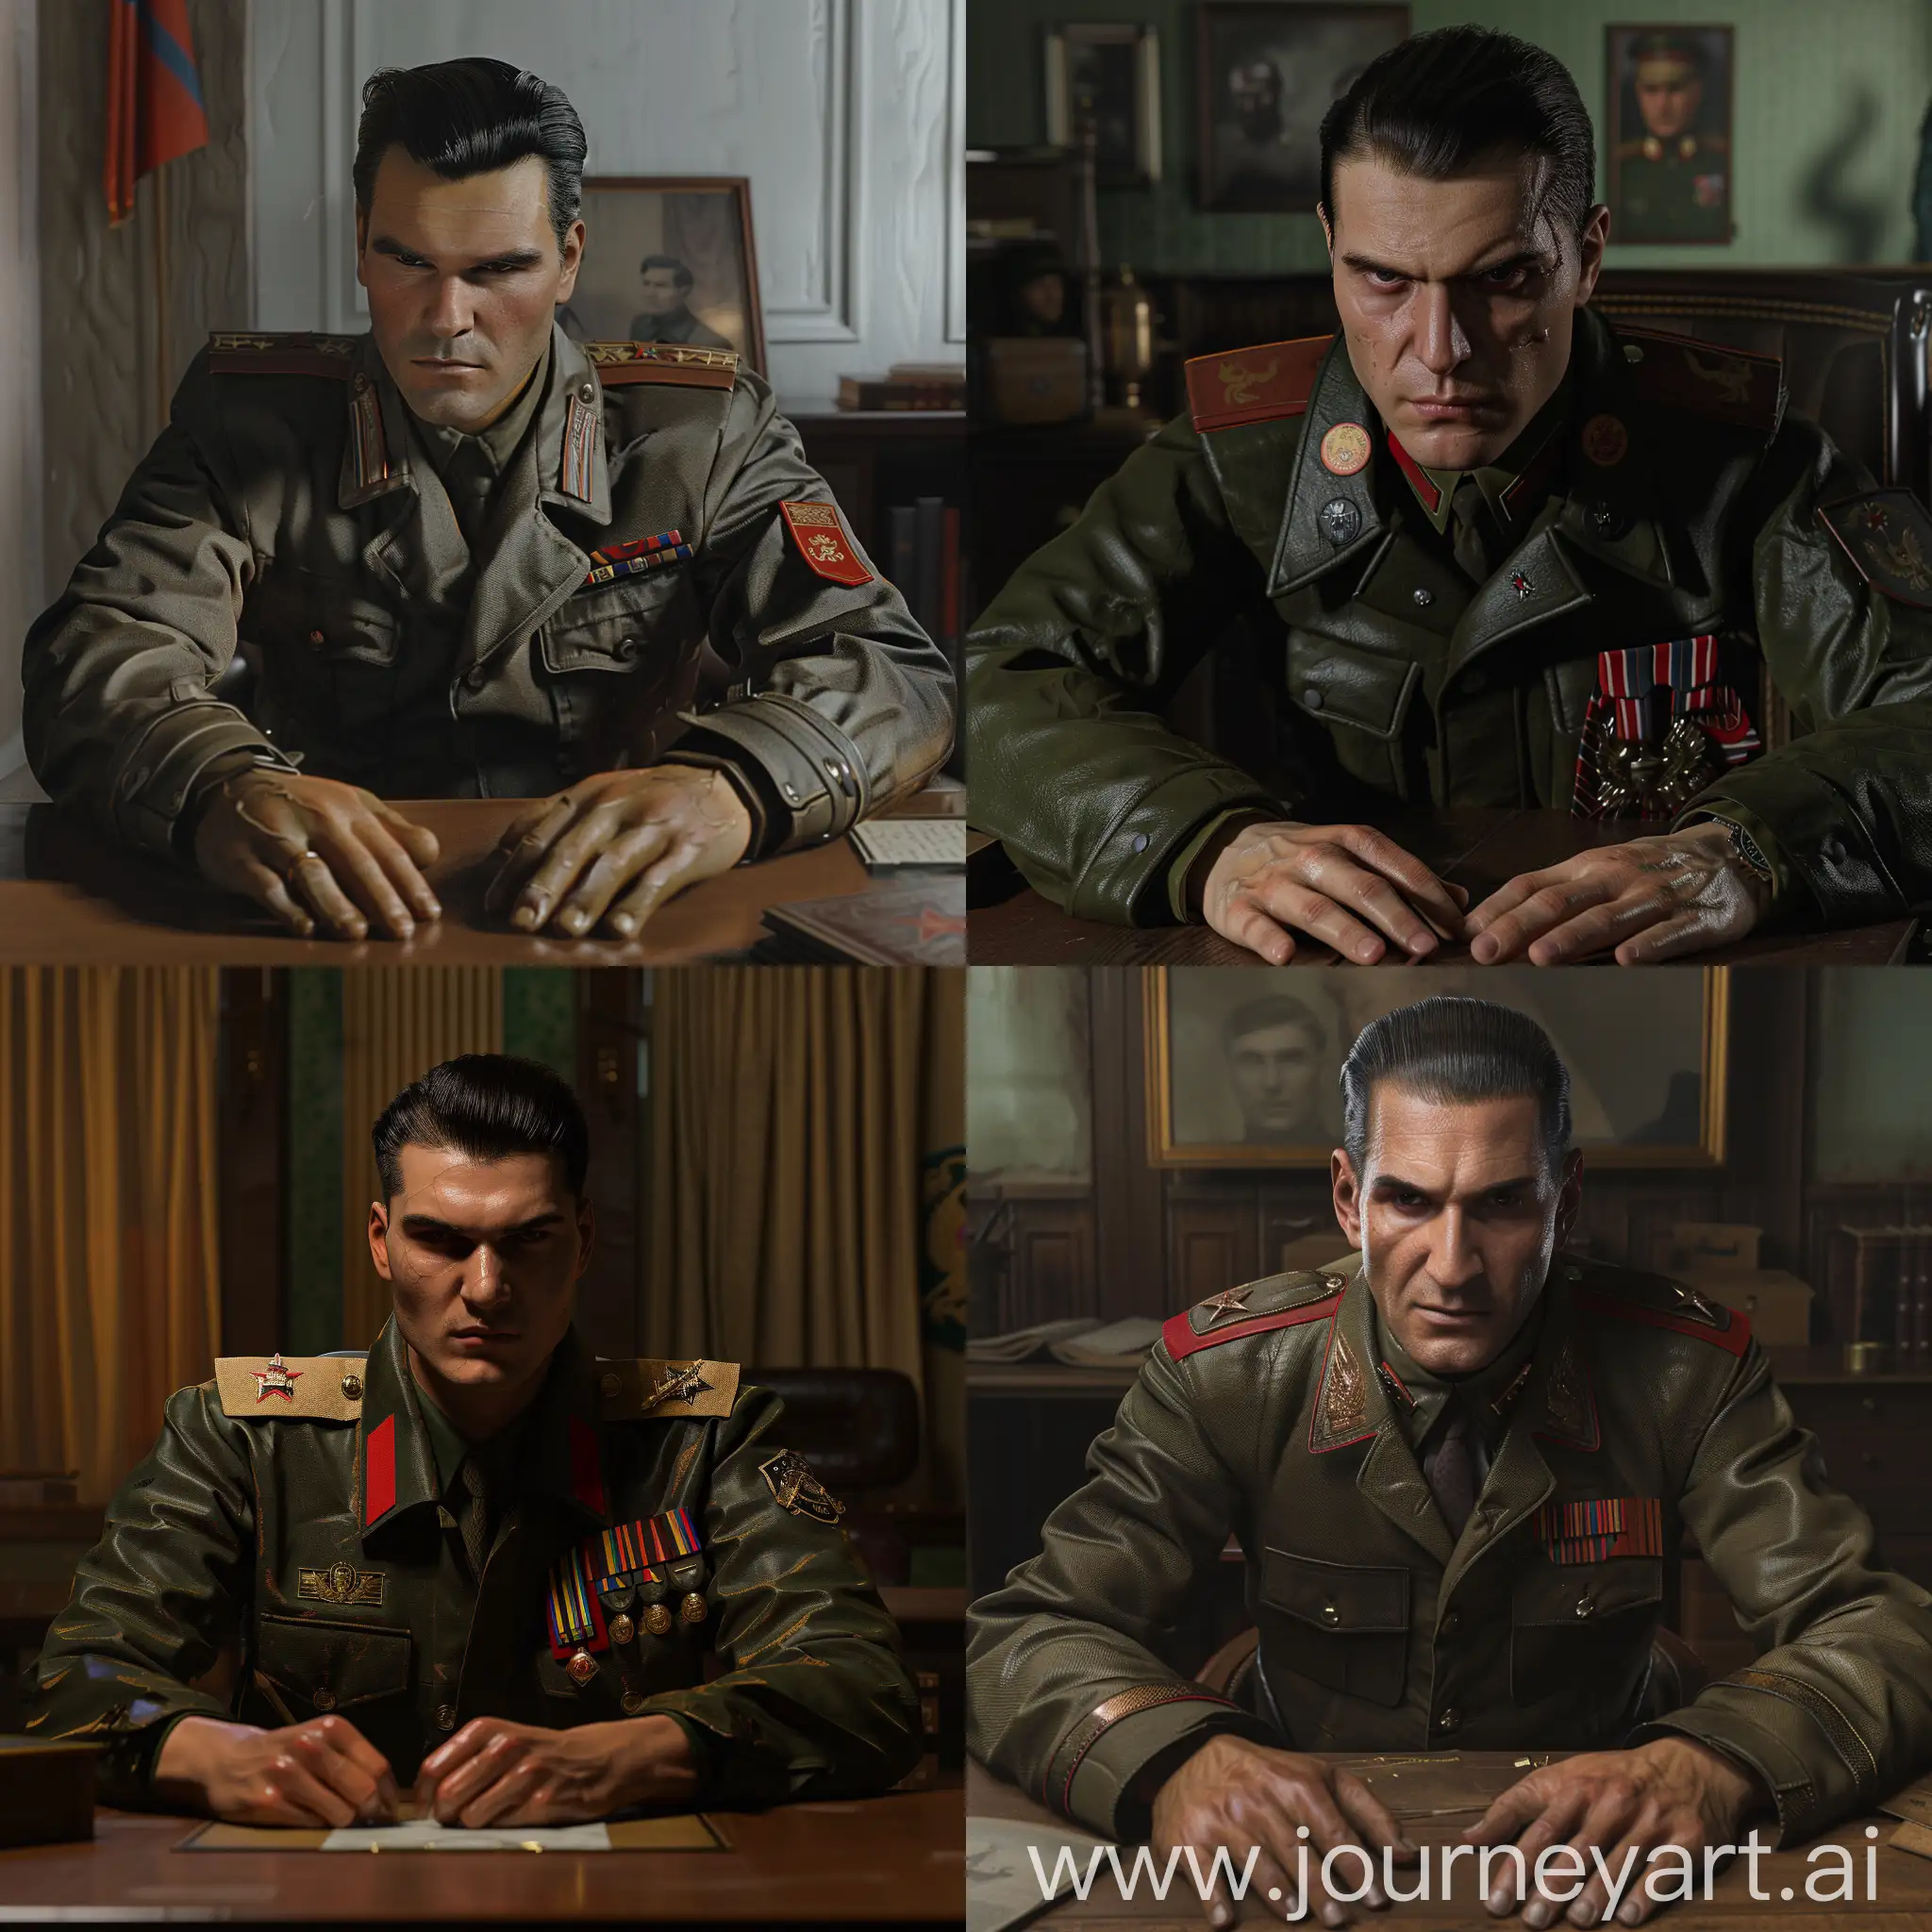 Soviet soldier, military jacket, Dark hair slicked back, sitting at desk, looking at camera, hands on table, captain's epaulettes, soviet office, hyperrealism, 8K image quality, 